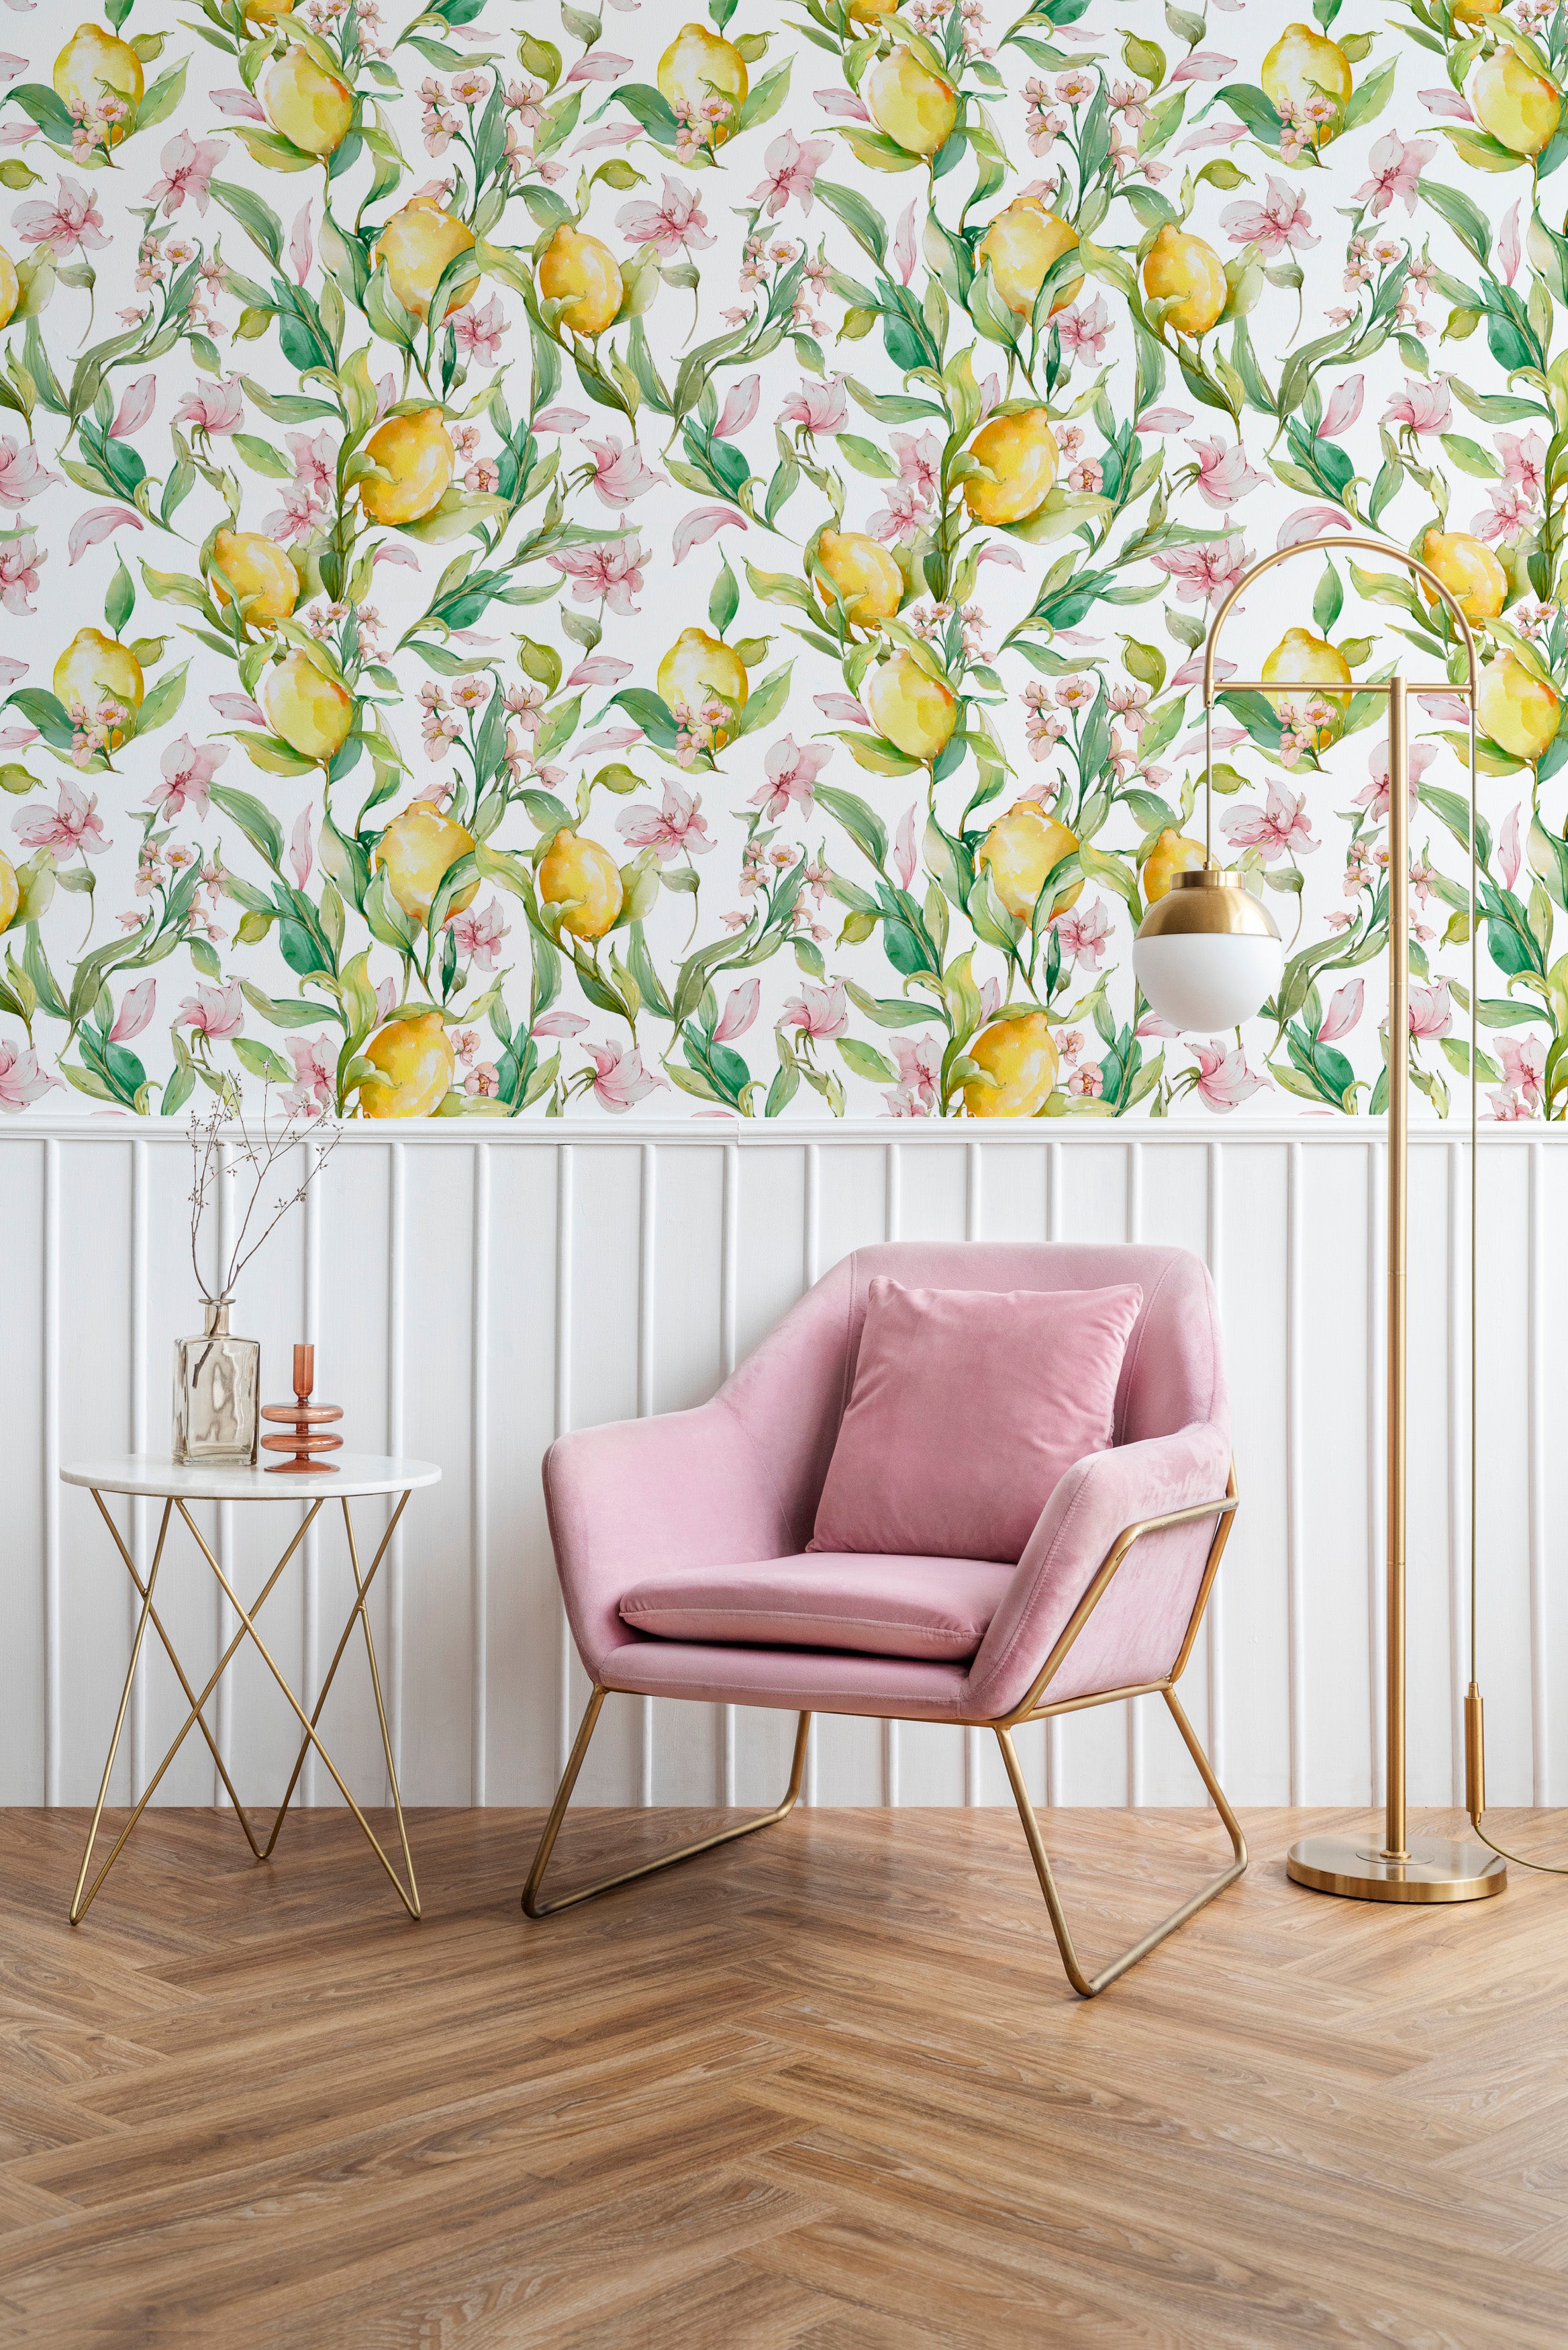 Contemporary living space accented with Citrus Blossom Wallpaper, which infuses the room with a burst of nature-inspired beauty. The wallpaper features yellow lemons and pink blossoms, complementing the modern pink armchair and golden decor elements, adding sophistication and warmth